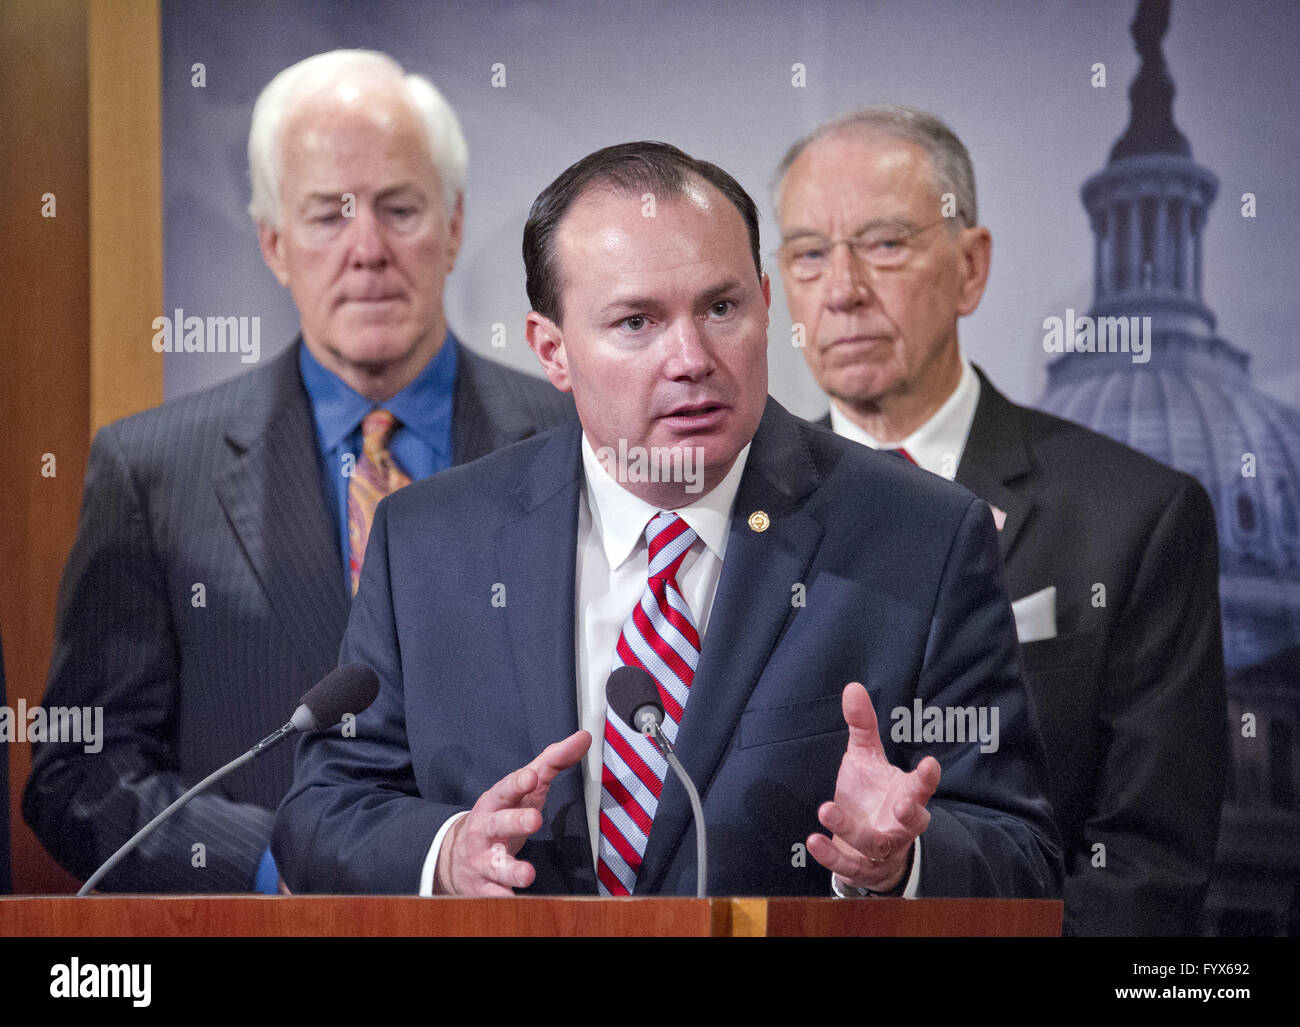 April 28, 2016 - Washington, District of Columbia, United States of America - United States Senator Mike Lee (Republican of Utah) makes remarks during a press conference calling on the US Senate Republican leadership to bring to the floor the bipartisan Sentencing Reform and Corrections Act, a bill to reduce some mandatory minimum sentences and apply those changes retroactively to inmates currently serving unfair sentences. Standing behind Sen. Lee are US Senator John Cornyn (Republican of Texas), left, and US Senator Chuck Grassley (Republican of Iowa), right.Credit: Ron Sachs/CNP (Credit Stock Photo